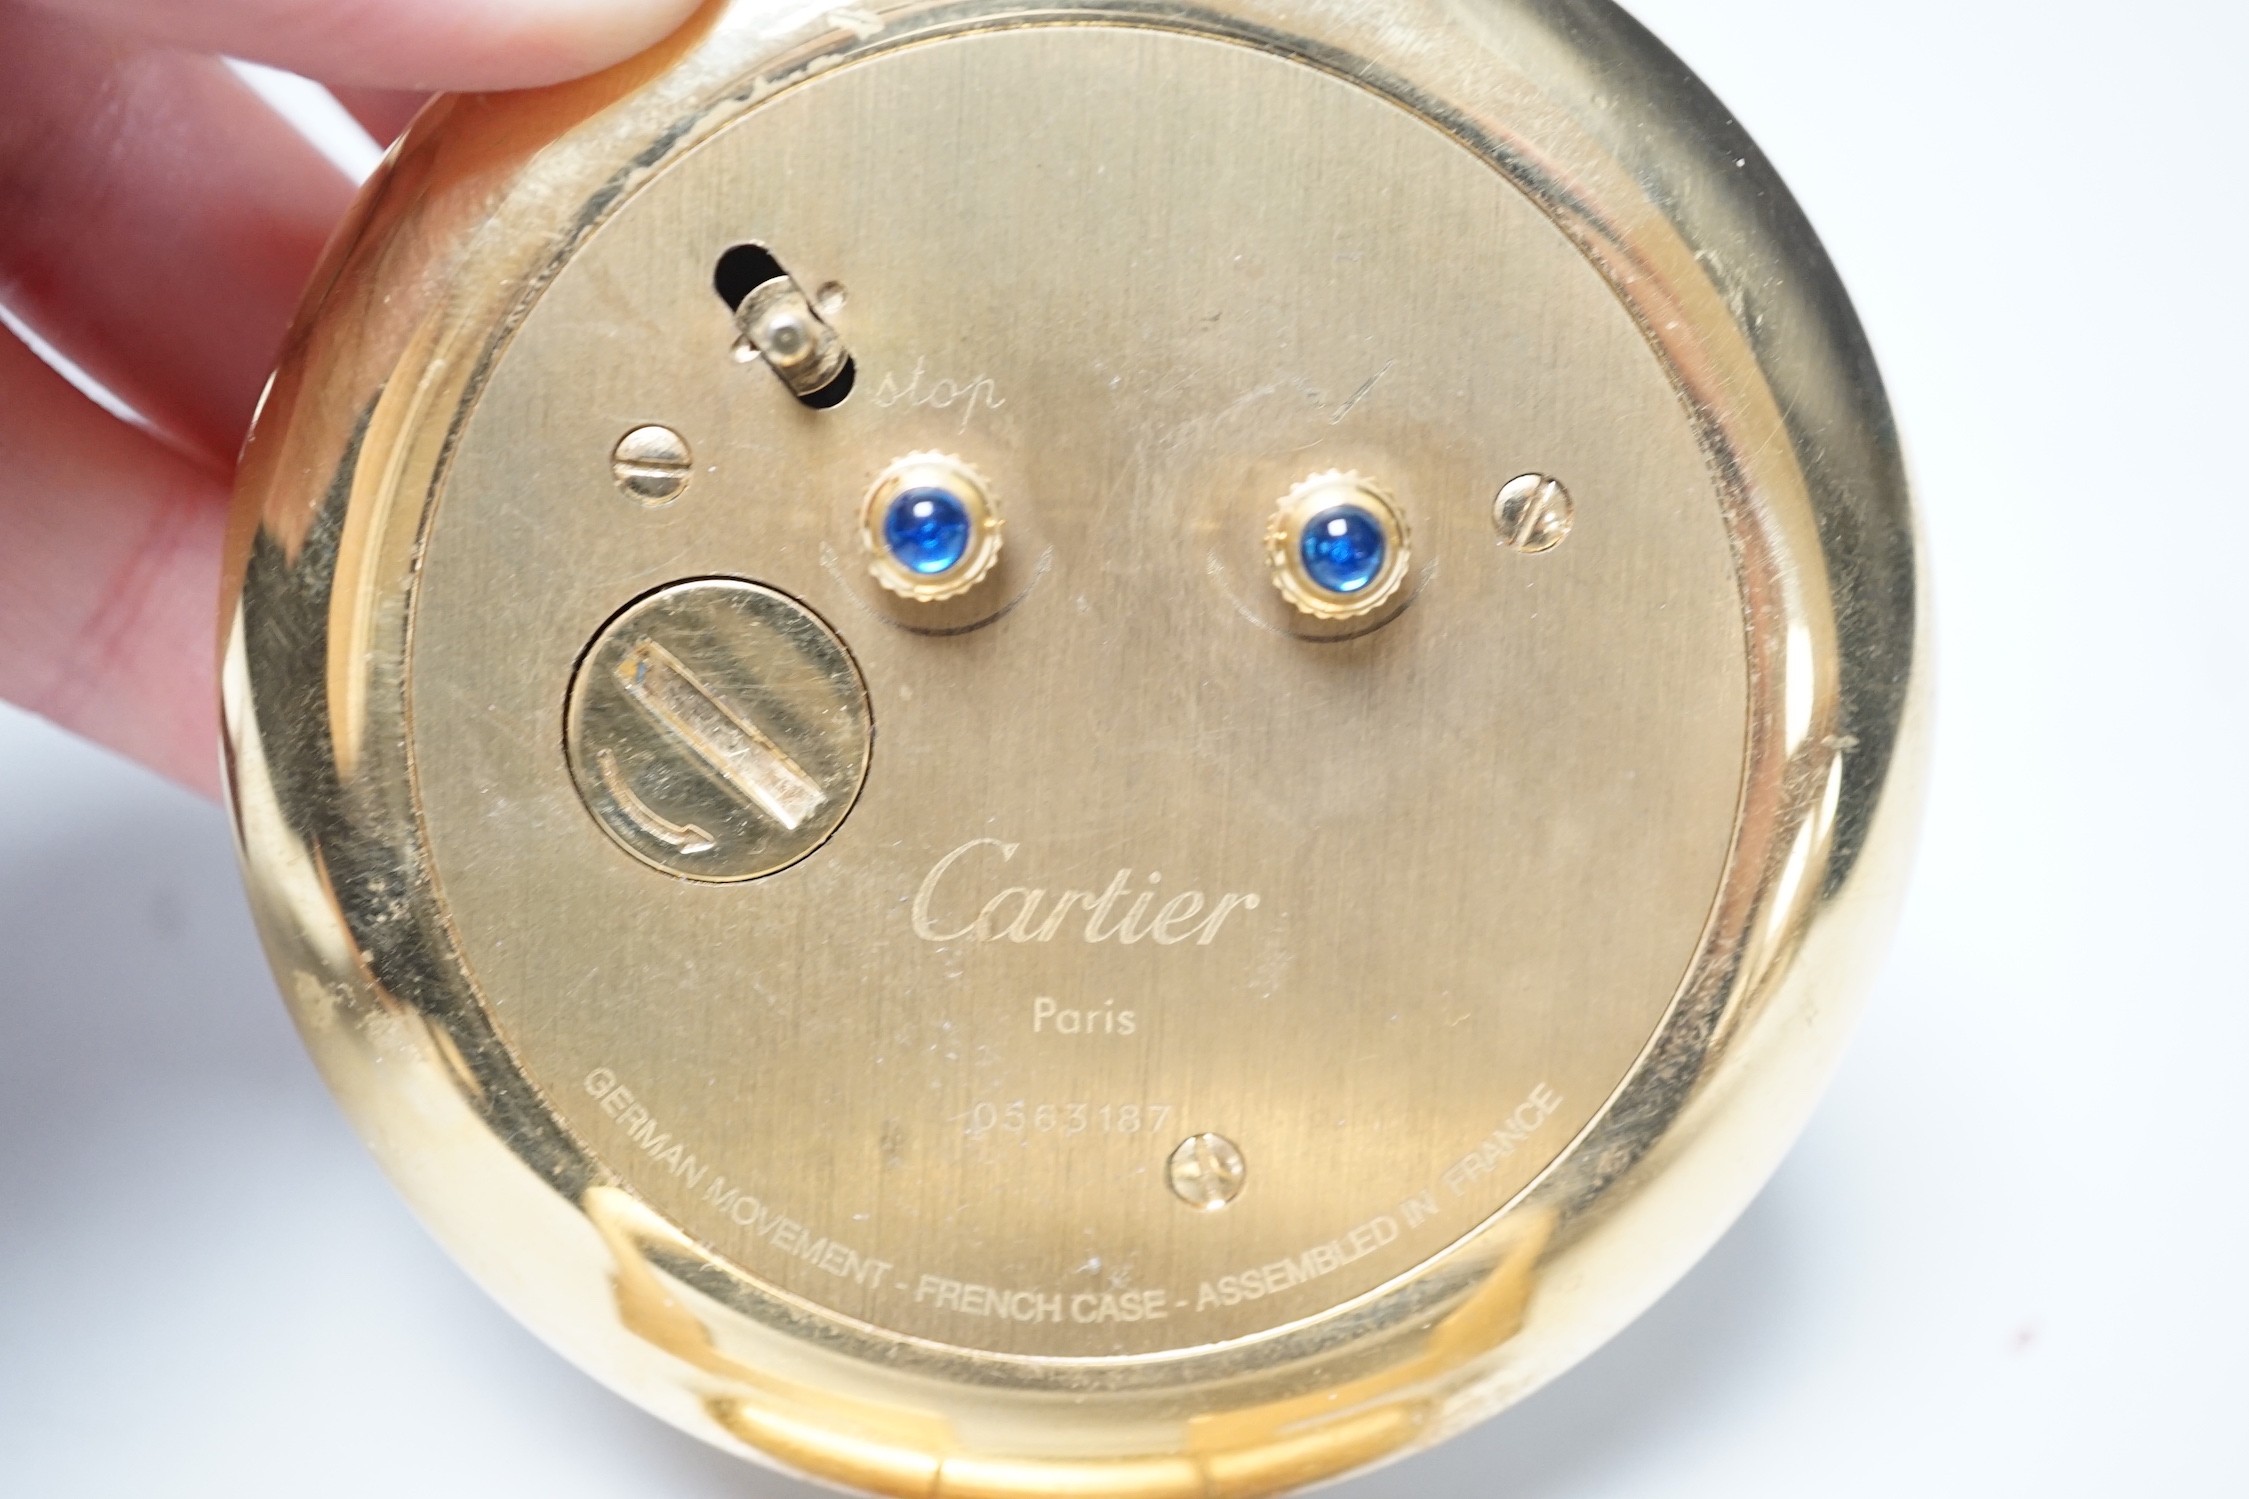 Cartier travelling alarm timepiece in case, serial number 0563187